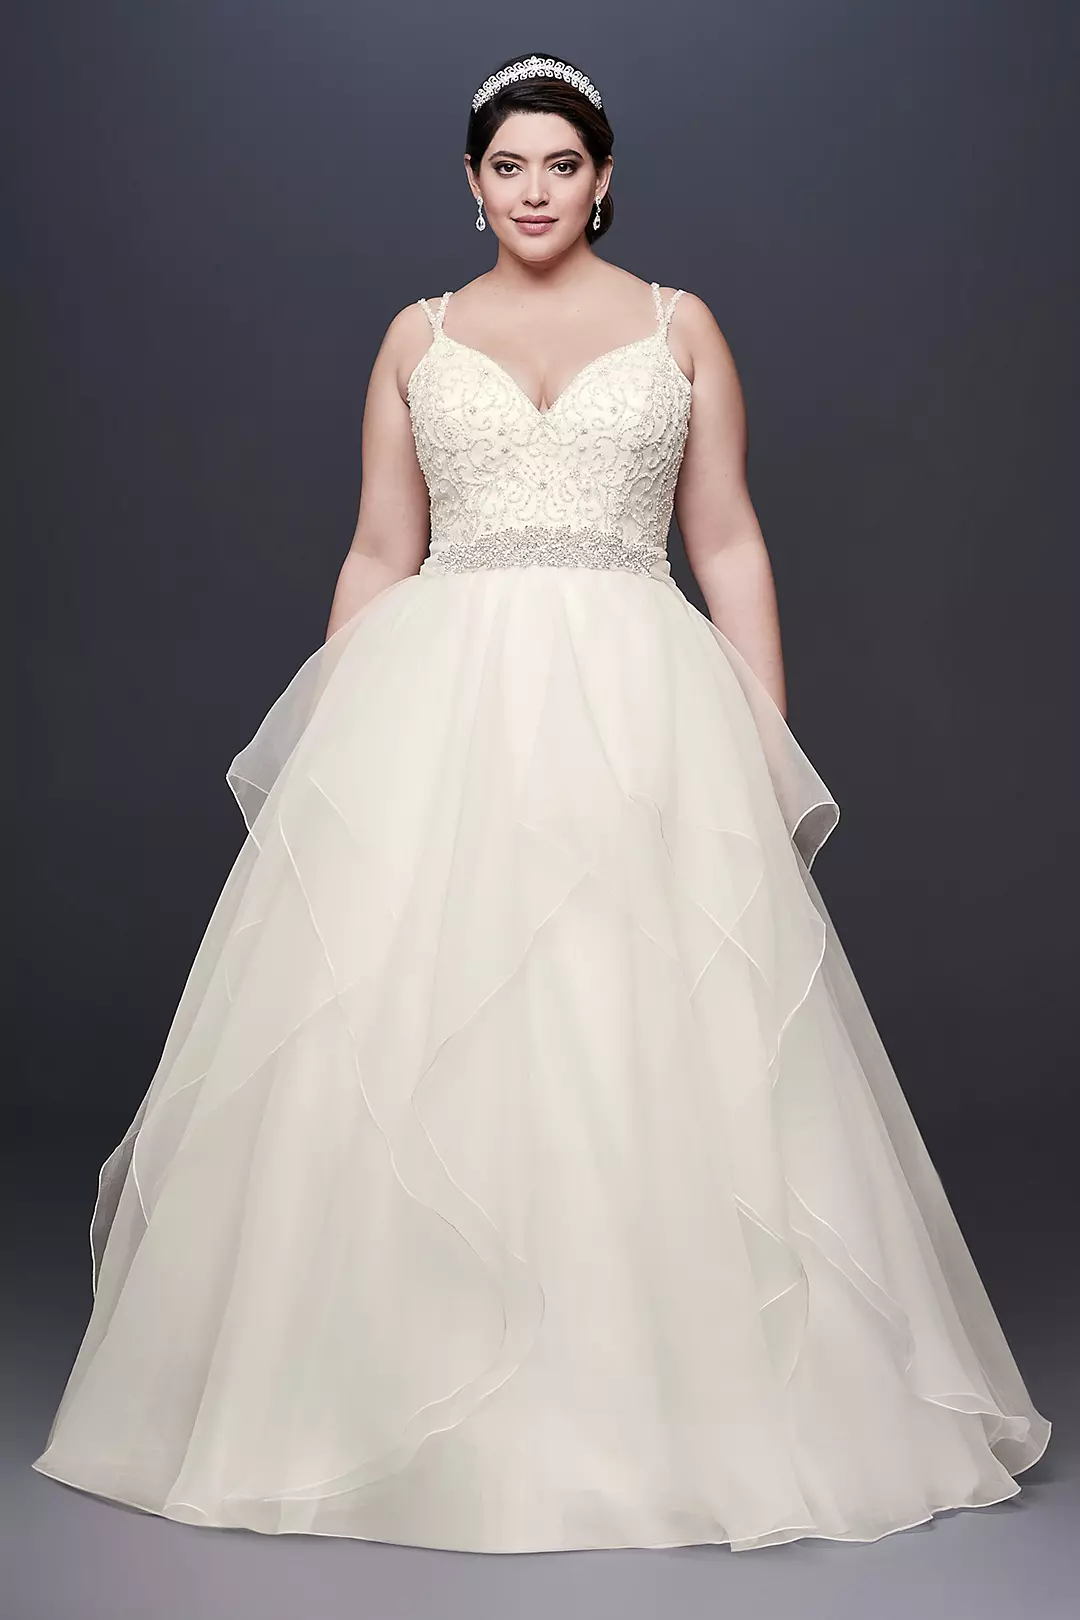 Garza Ball Gown Wedding Dress with Double Straps Image